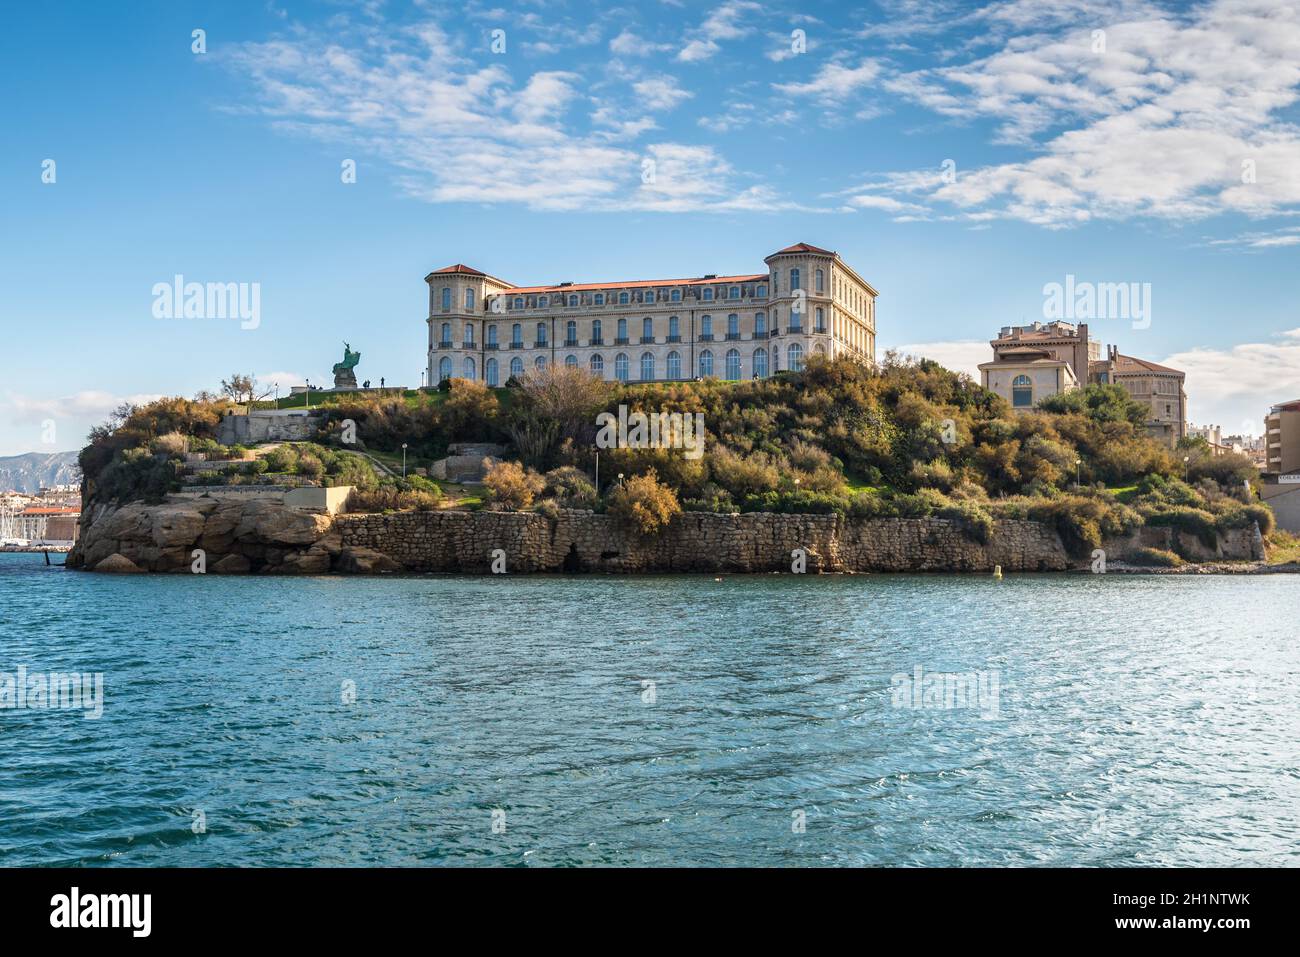 Marseille, France - December 4, 2016: View from the sea to the Pharo palace located at a high point of the Marseille coast line in Provence, France. I Stock Photo